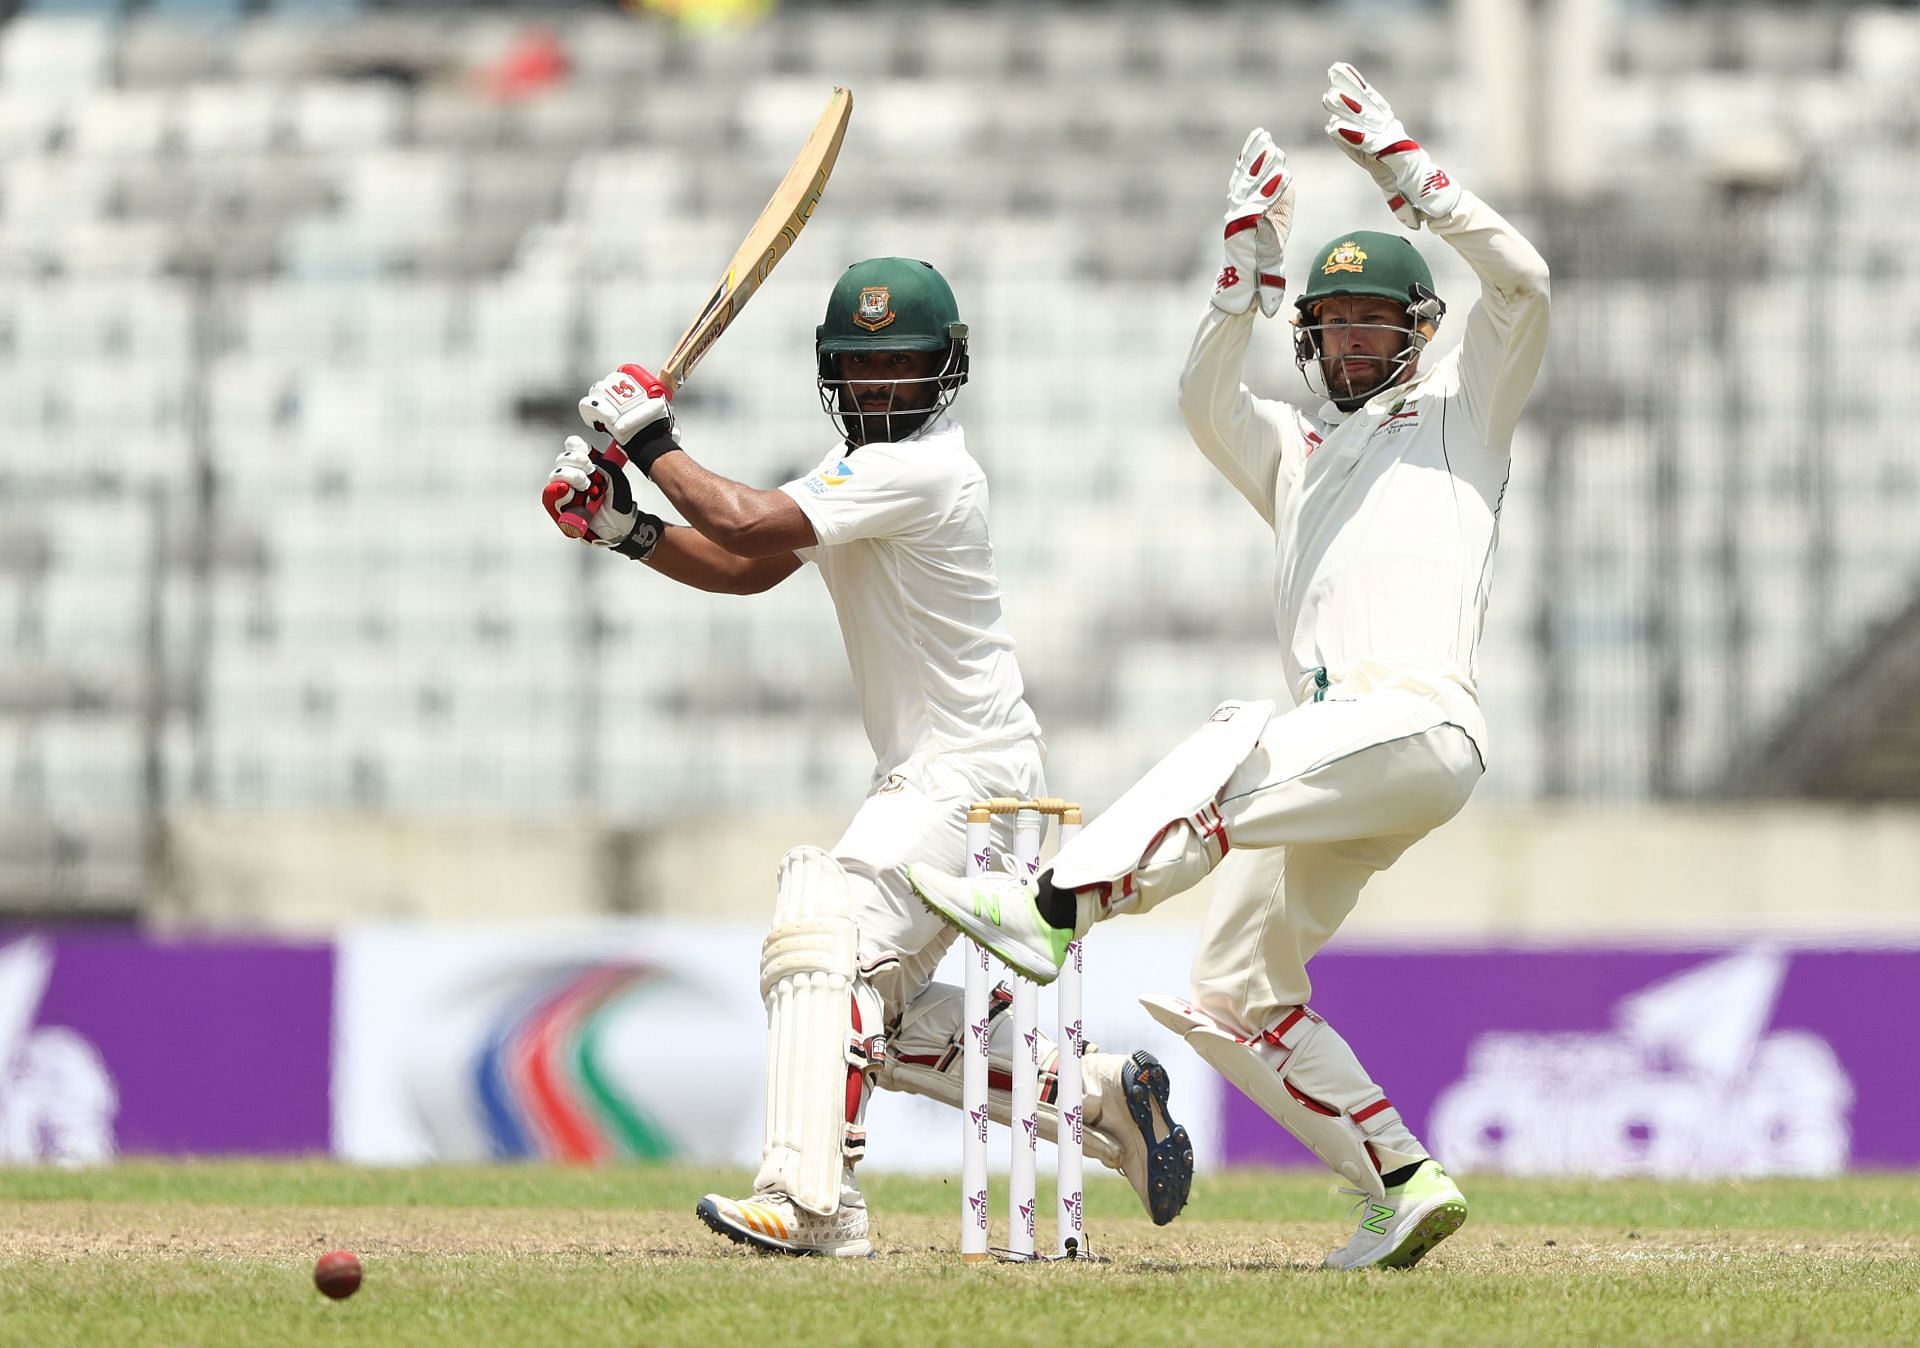 Shakib Al Hasan scored 68 runs in his only match during the ICC World Test Championship 2019-21 cycle.